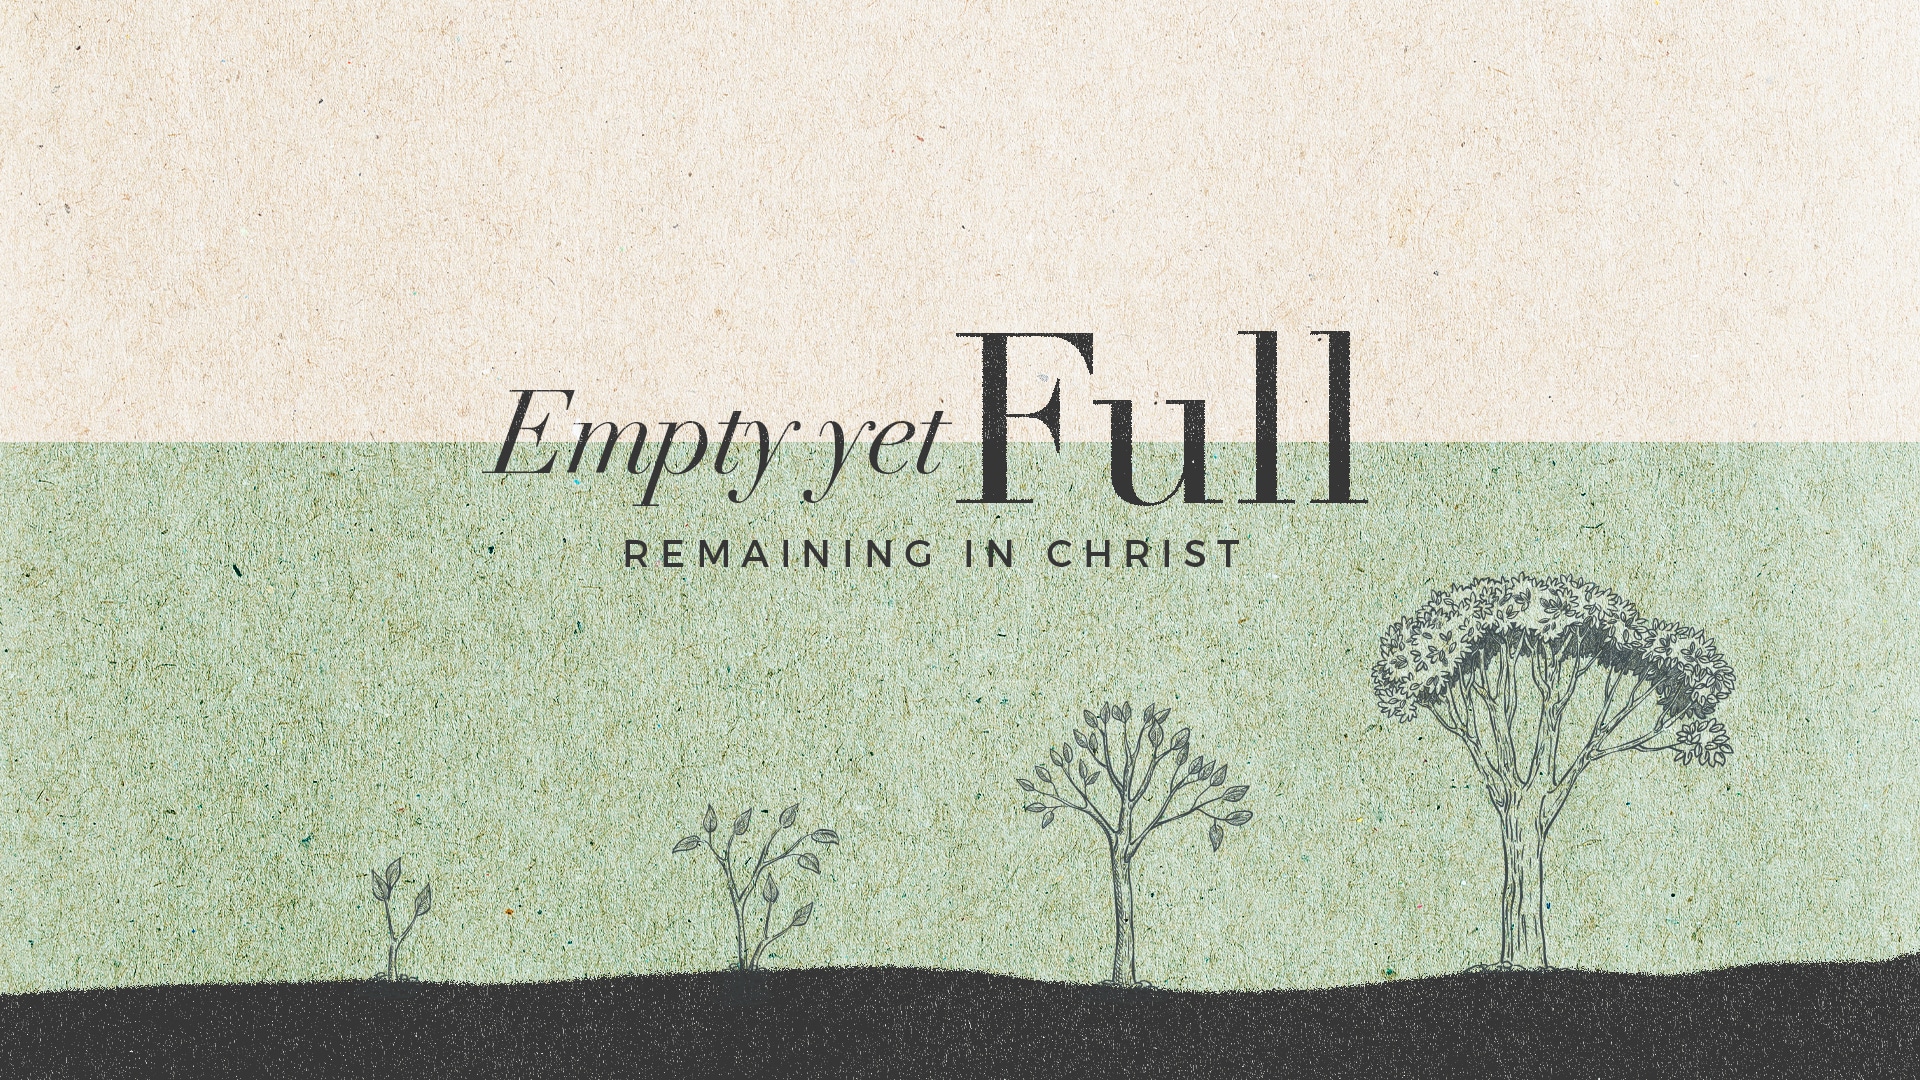 Brooklyn Tabernacle Grow Empty Yet Full Remaining in Christ Thumbnail